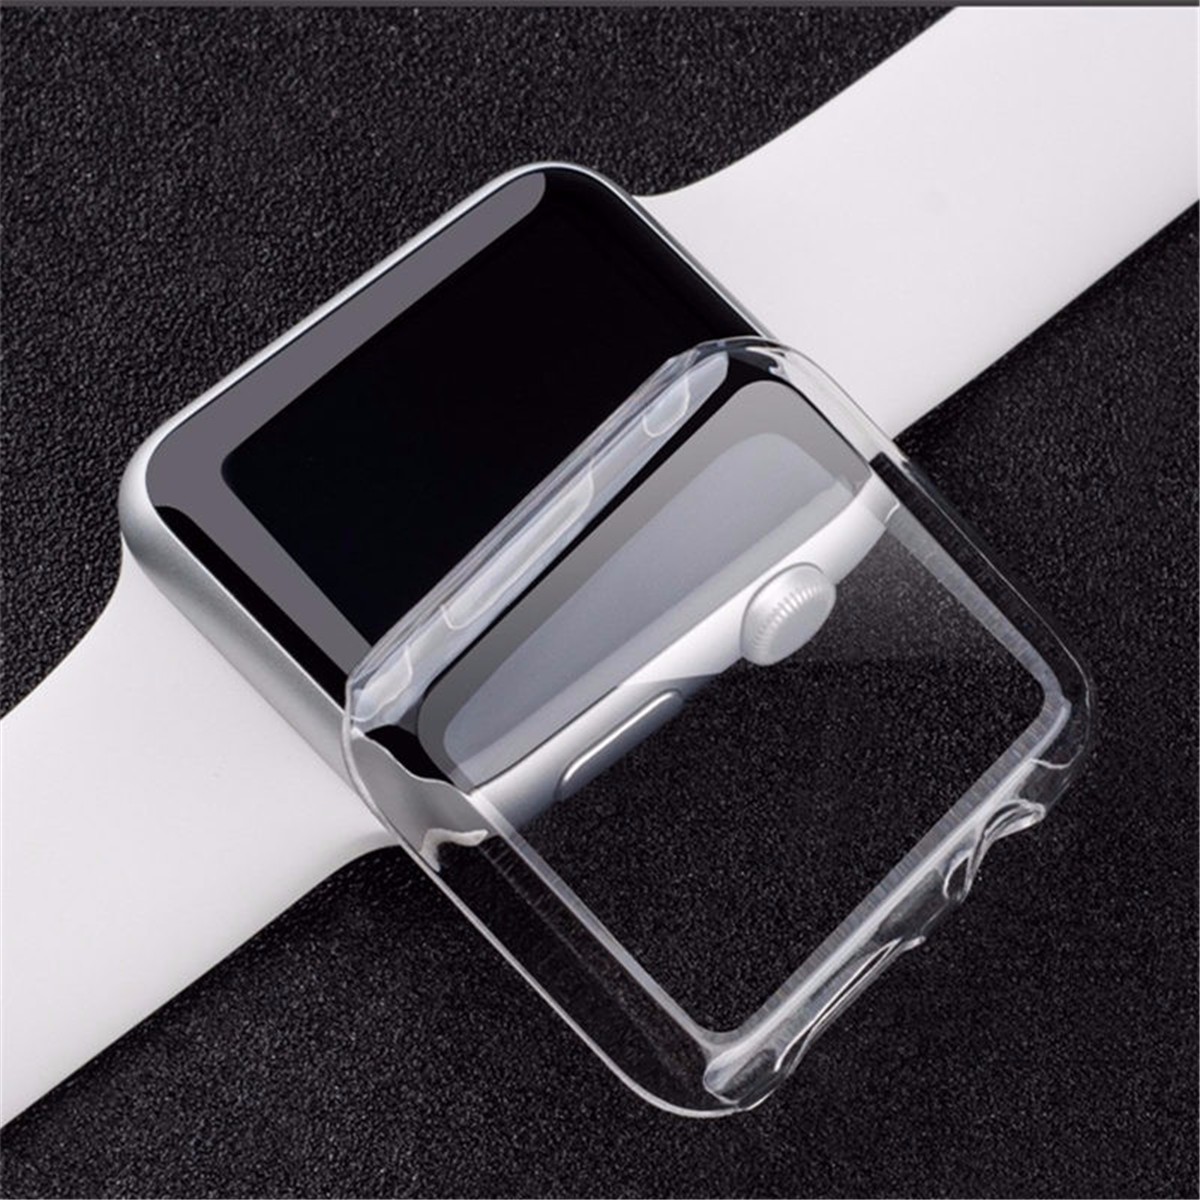 Transparent-Clear-Thin-Hard-Clip-On-Case-Cover-Screen-Protector-For-3842mm-Apple-Watch-1-1107650-2